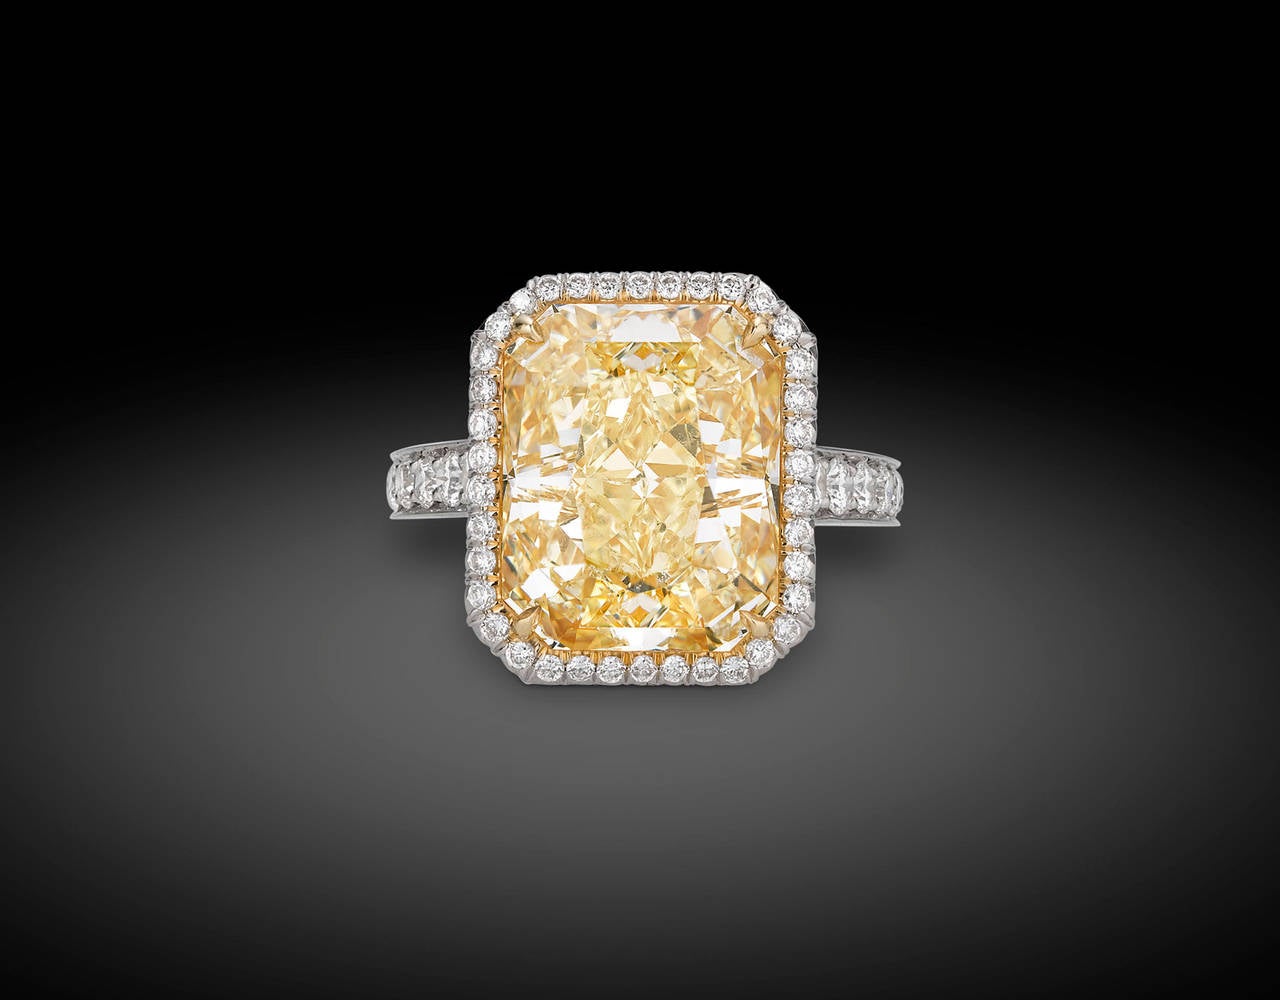 This mesmerizing 10.21-carat Fancy Yellow diamond displays a vivid hue rivaled only by the brilliance of the sun. Set in platinum and 18K yellow gold, the astounding modified brilliant-cut gem is certified by the Gemological Institute of America